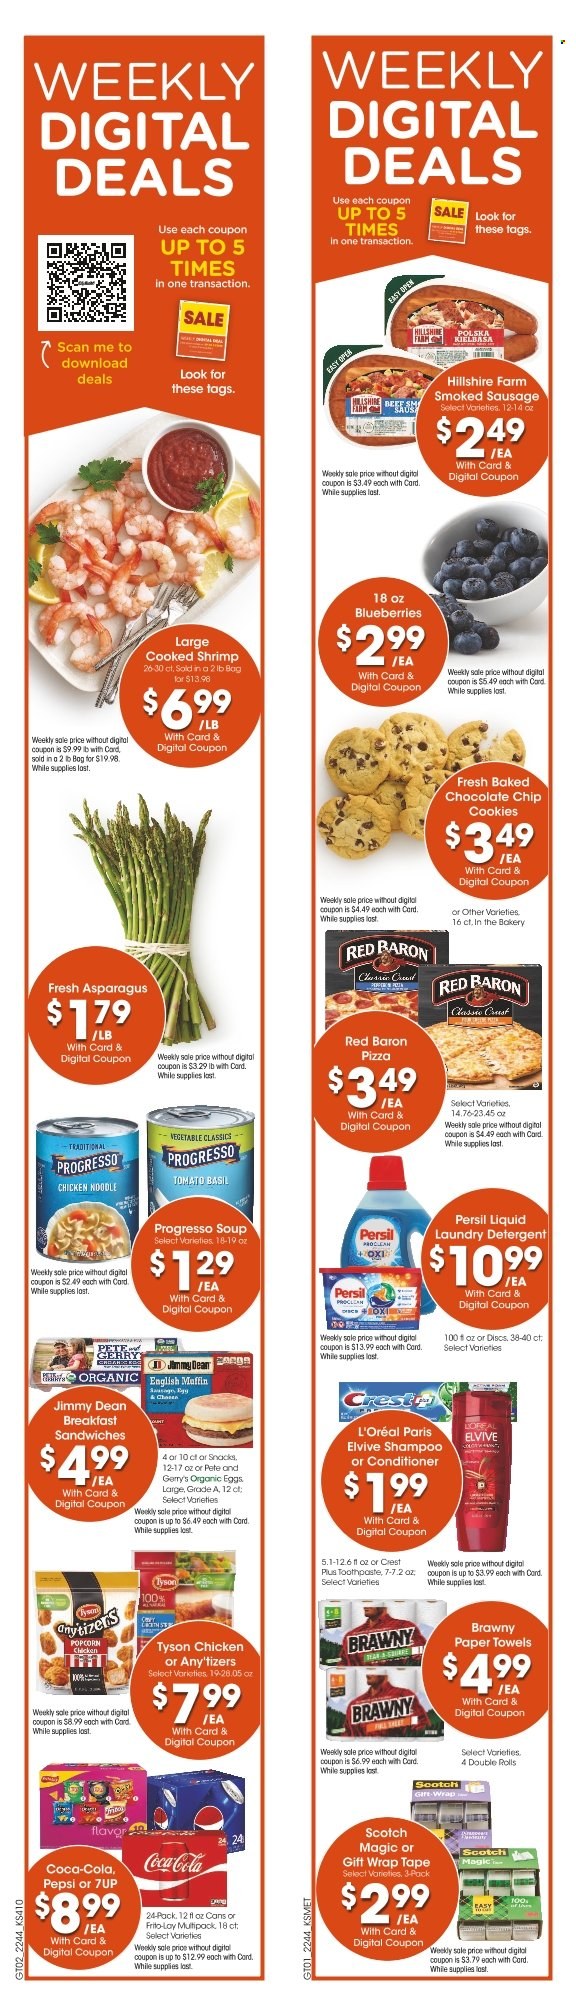 thumbnail - City Market Flyer - 11/30/2022 - 12/06/2022 - Sales products - asparagus, blueberries, shrimps, pizza, noodles, Progresso, Jimmy Dean, Hillshire Farm, sausage, smoked sausage, kielbasa, eggs, Red Baron, cookies, popcorn, Frito-Lay, pepper, Coca-Cola, Pepsi, 7UP, kitchen towels, paper towels, detergent, Persil, laundry detergent, shampoo, toothpaste, Crest, L’Oréal, conditioner, gift wrap. Page 11.